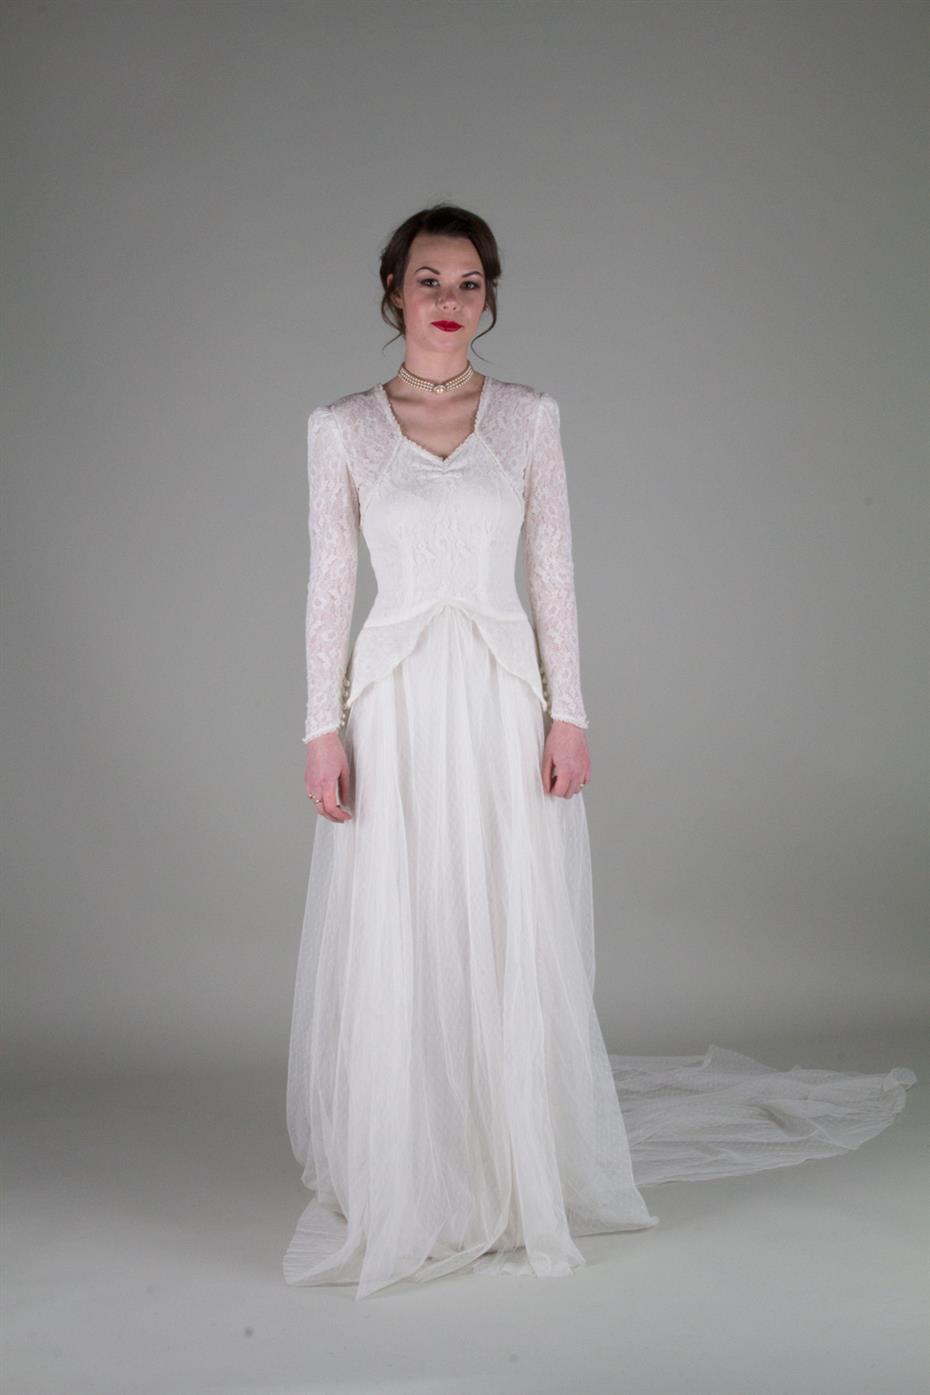 Dreamy Vintage Wedding Dresses From Authentic Vintage Bridal